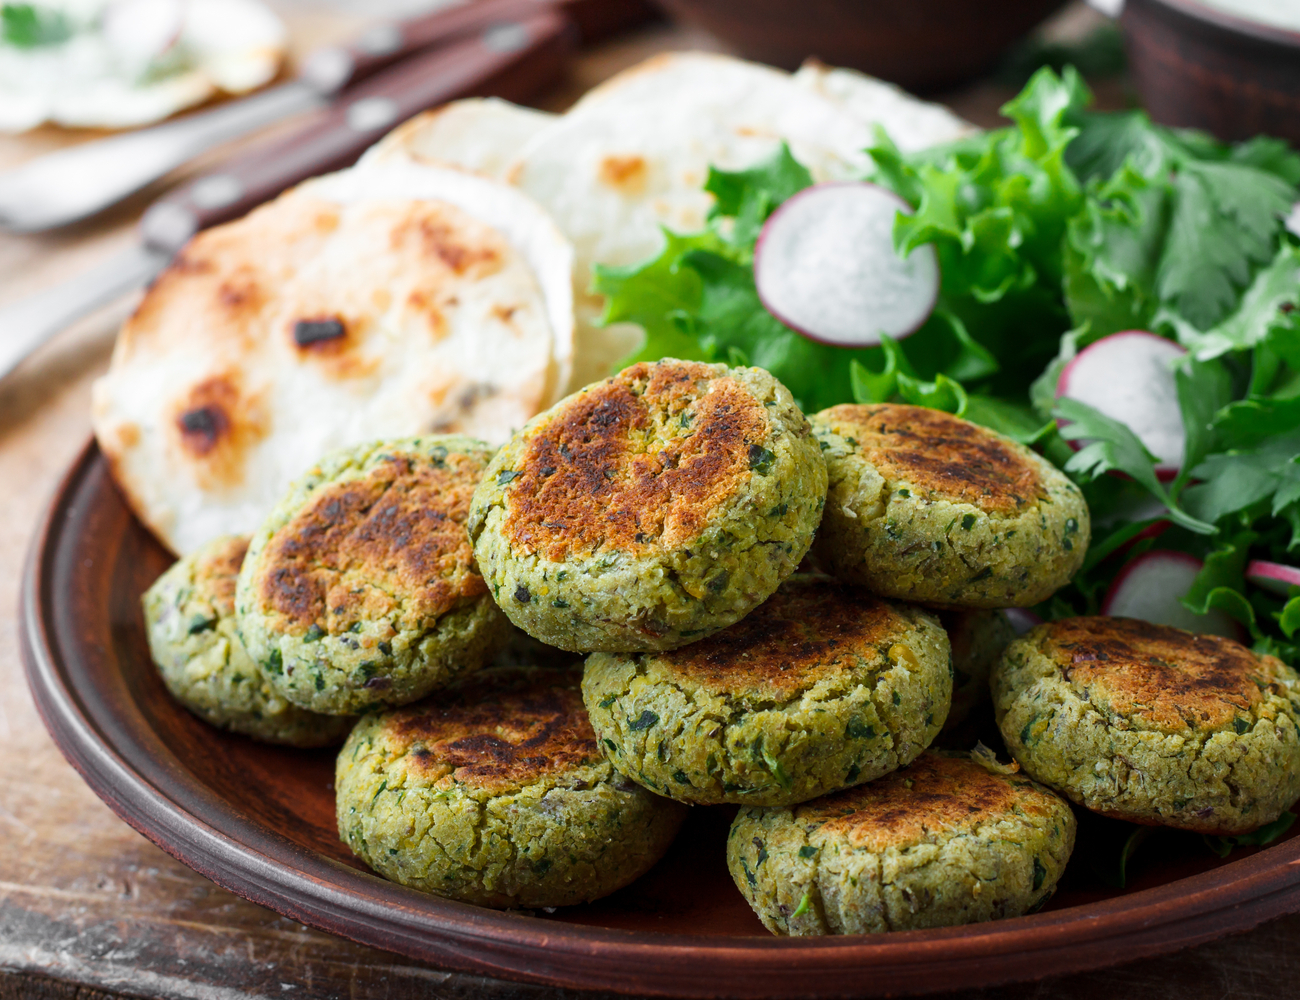 Baked Falafel Recipe: The Best Recipe for Falafel That Doesn't Fall Apart